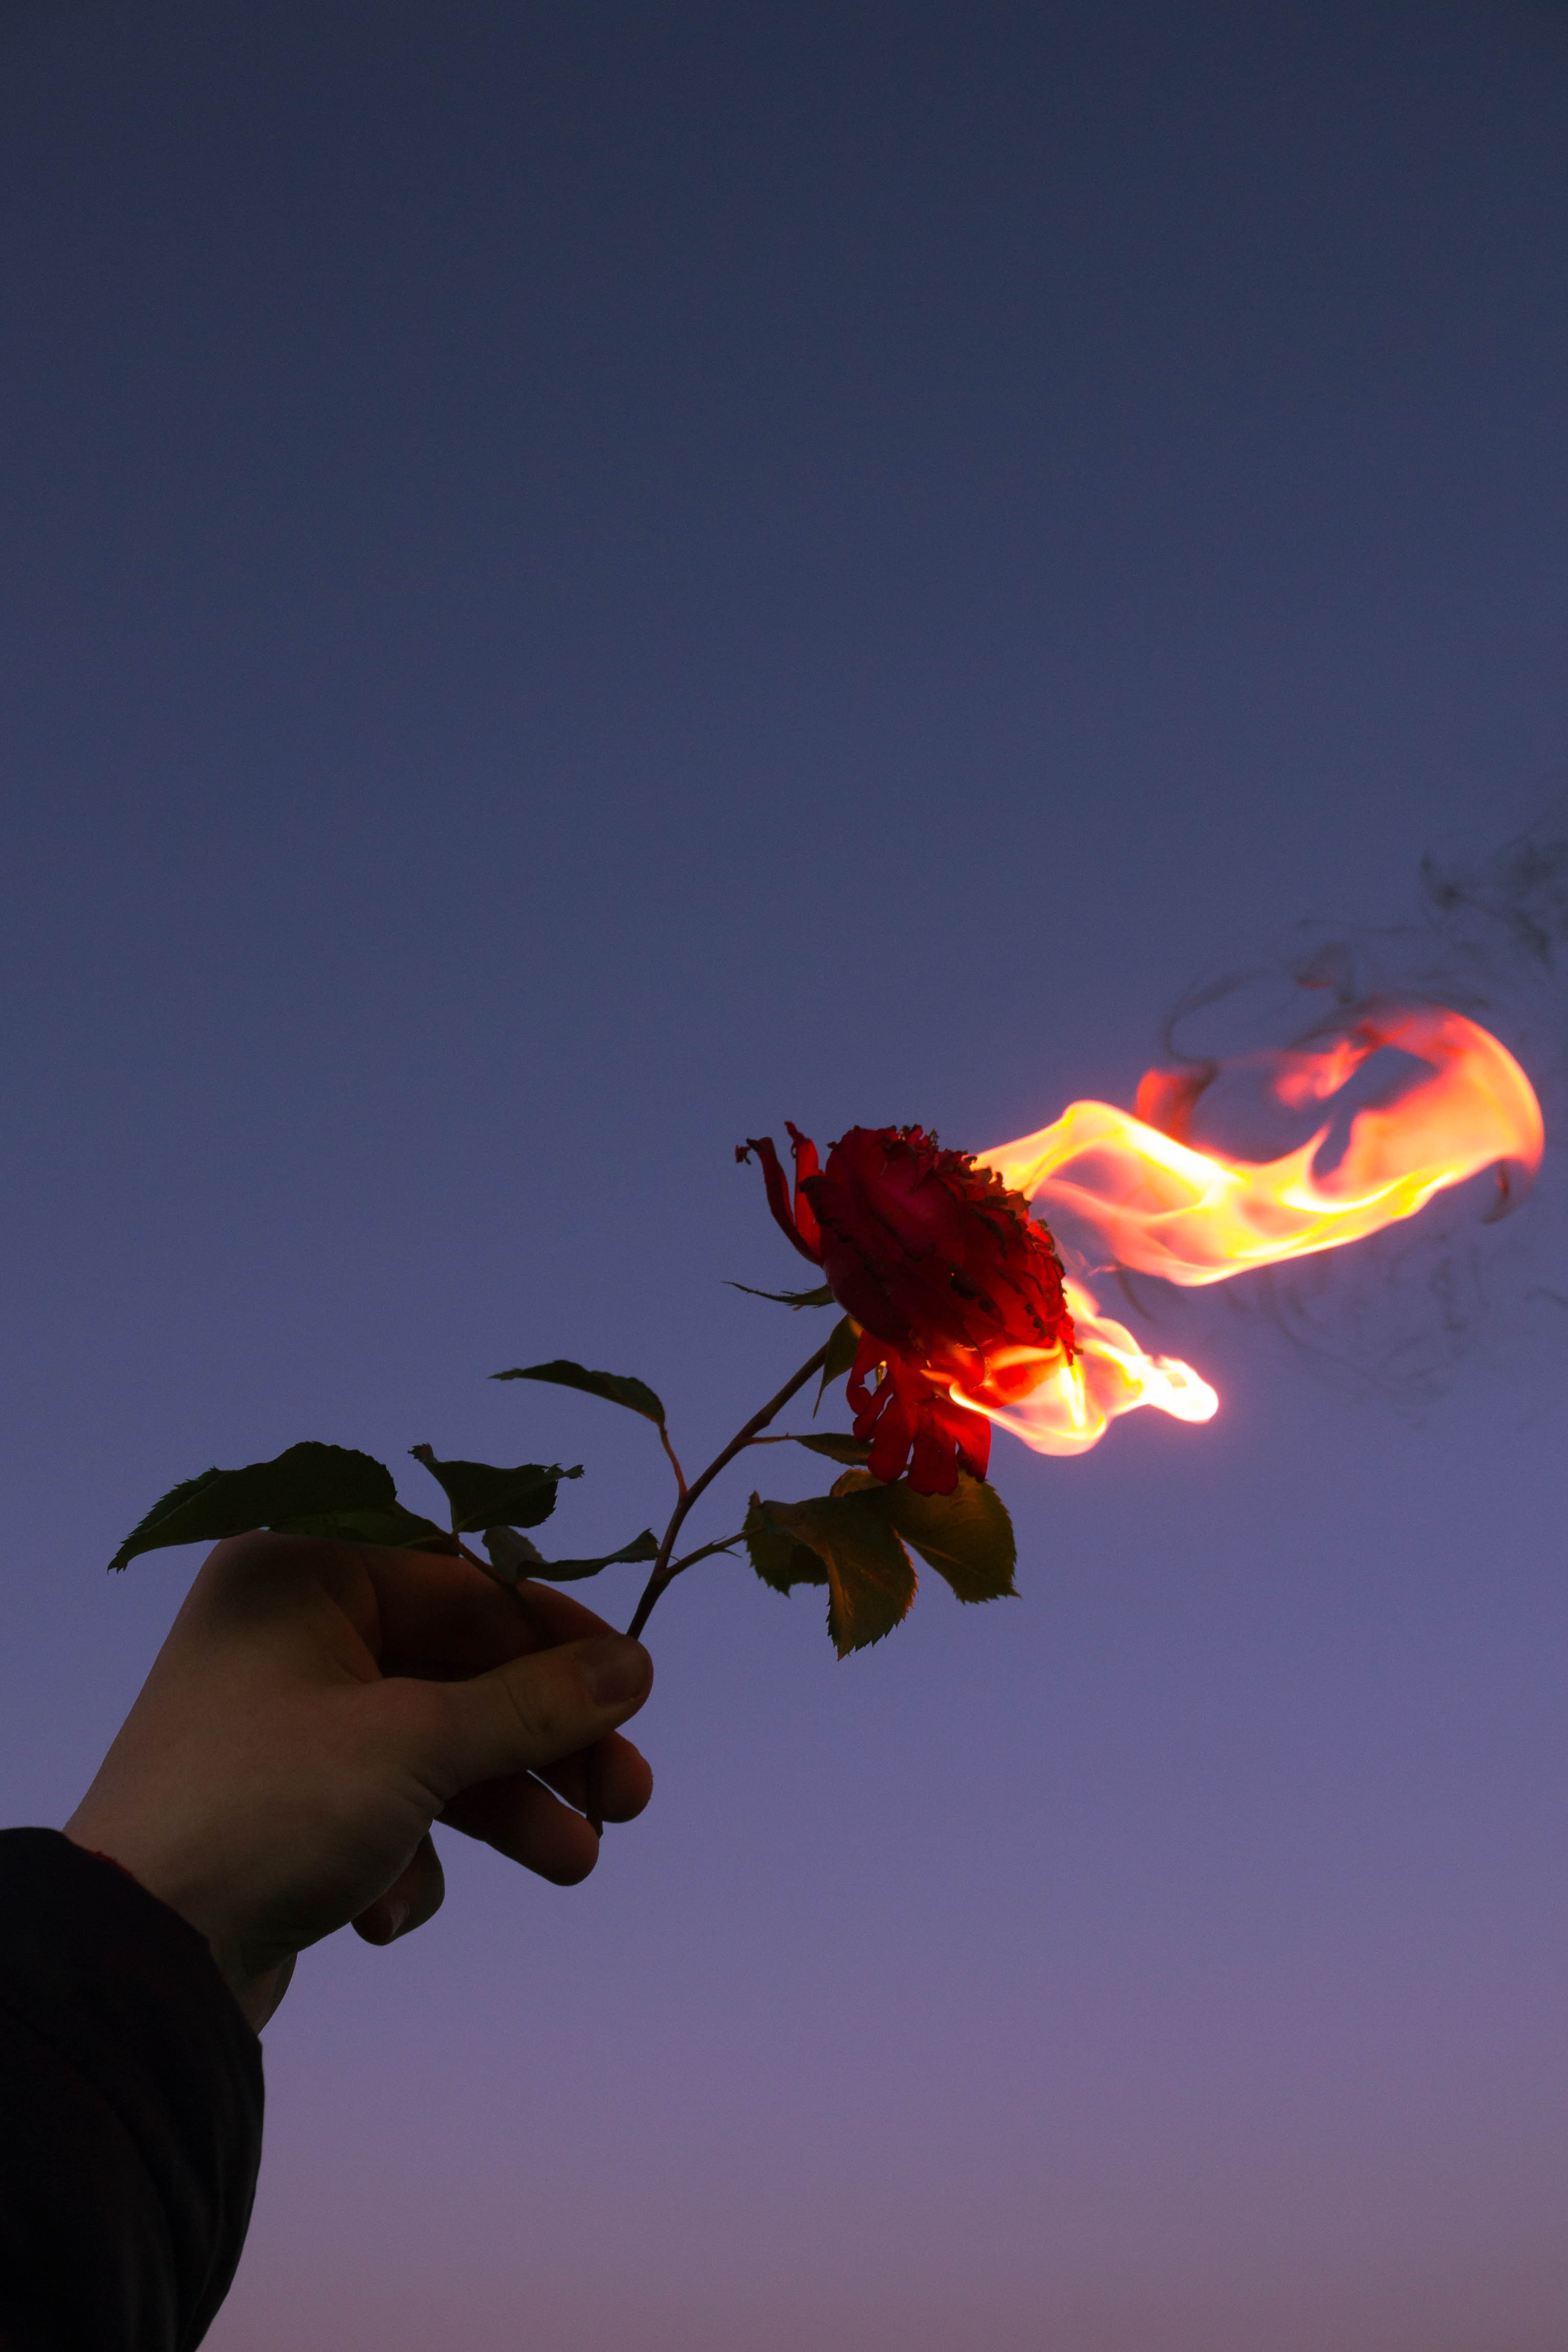 rose, hand, fire, rose flower, miscellanea, flower, flame, miscellaneous 1080p